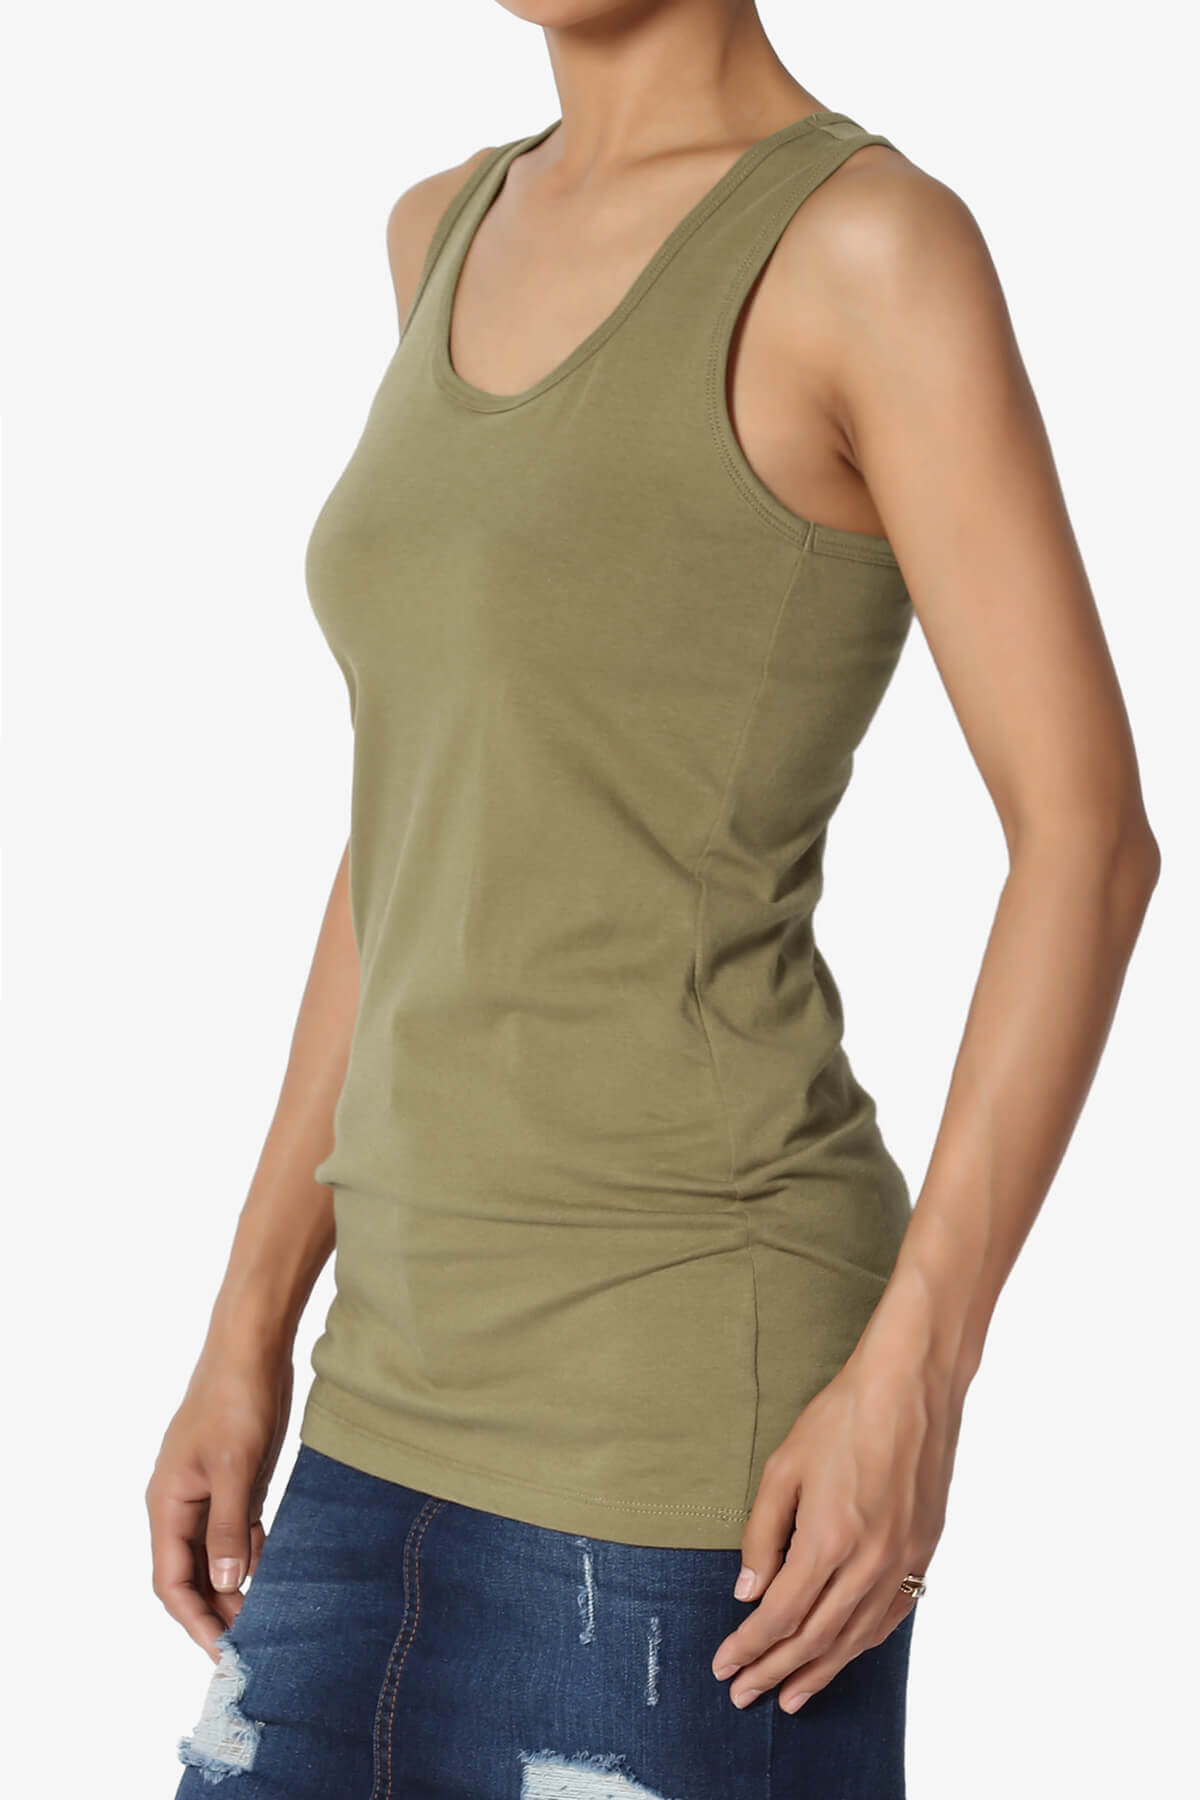 Load image into Gallery viewer, Marnie Racerback Tank Top OLIVE KHAKI_3
